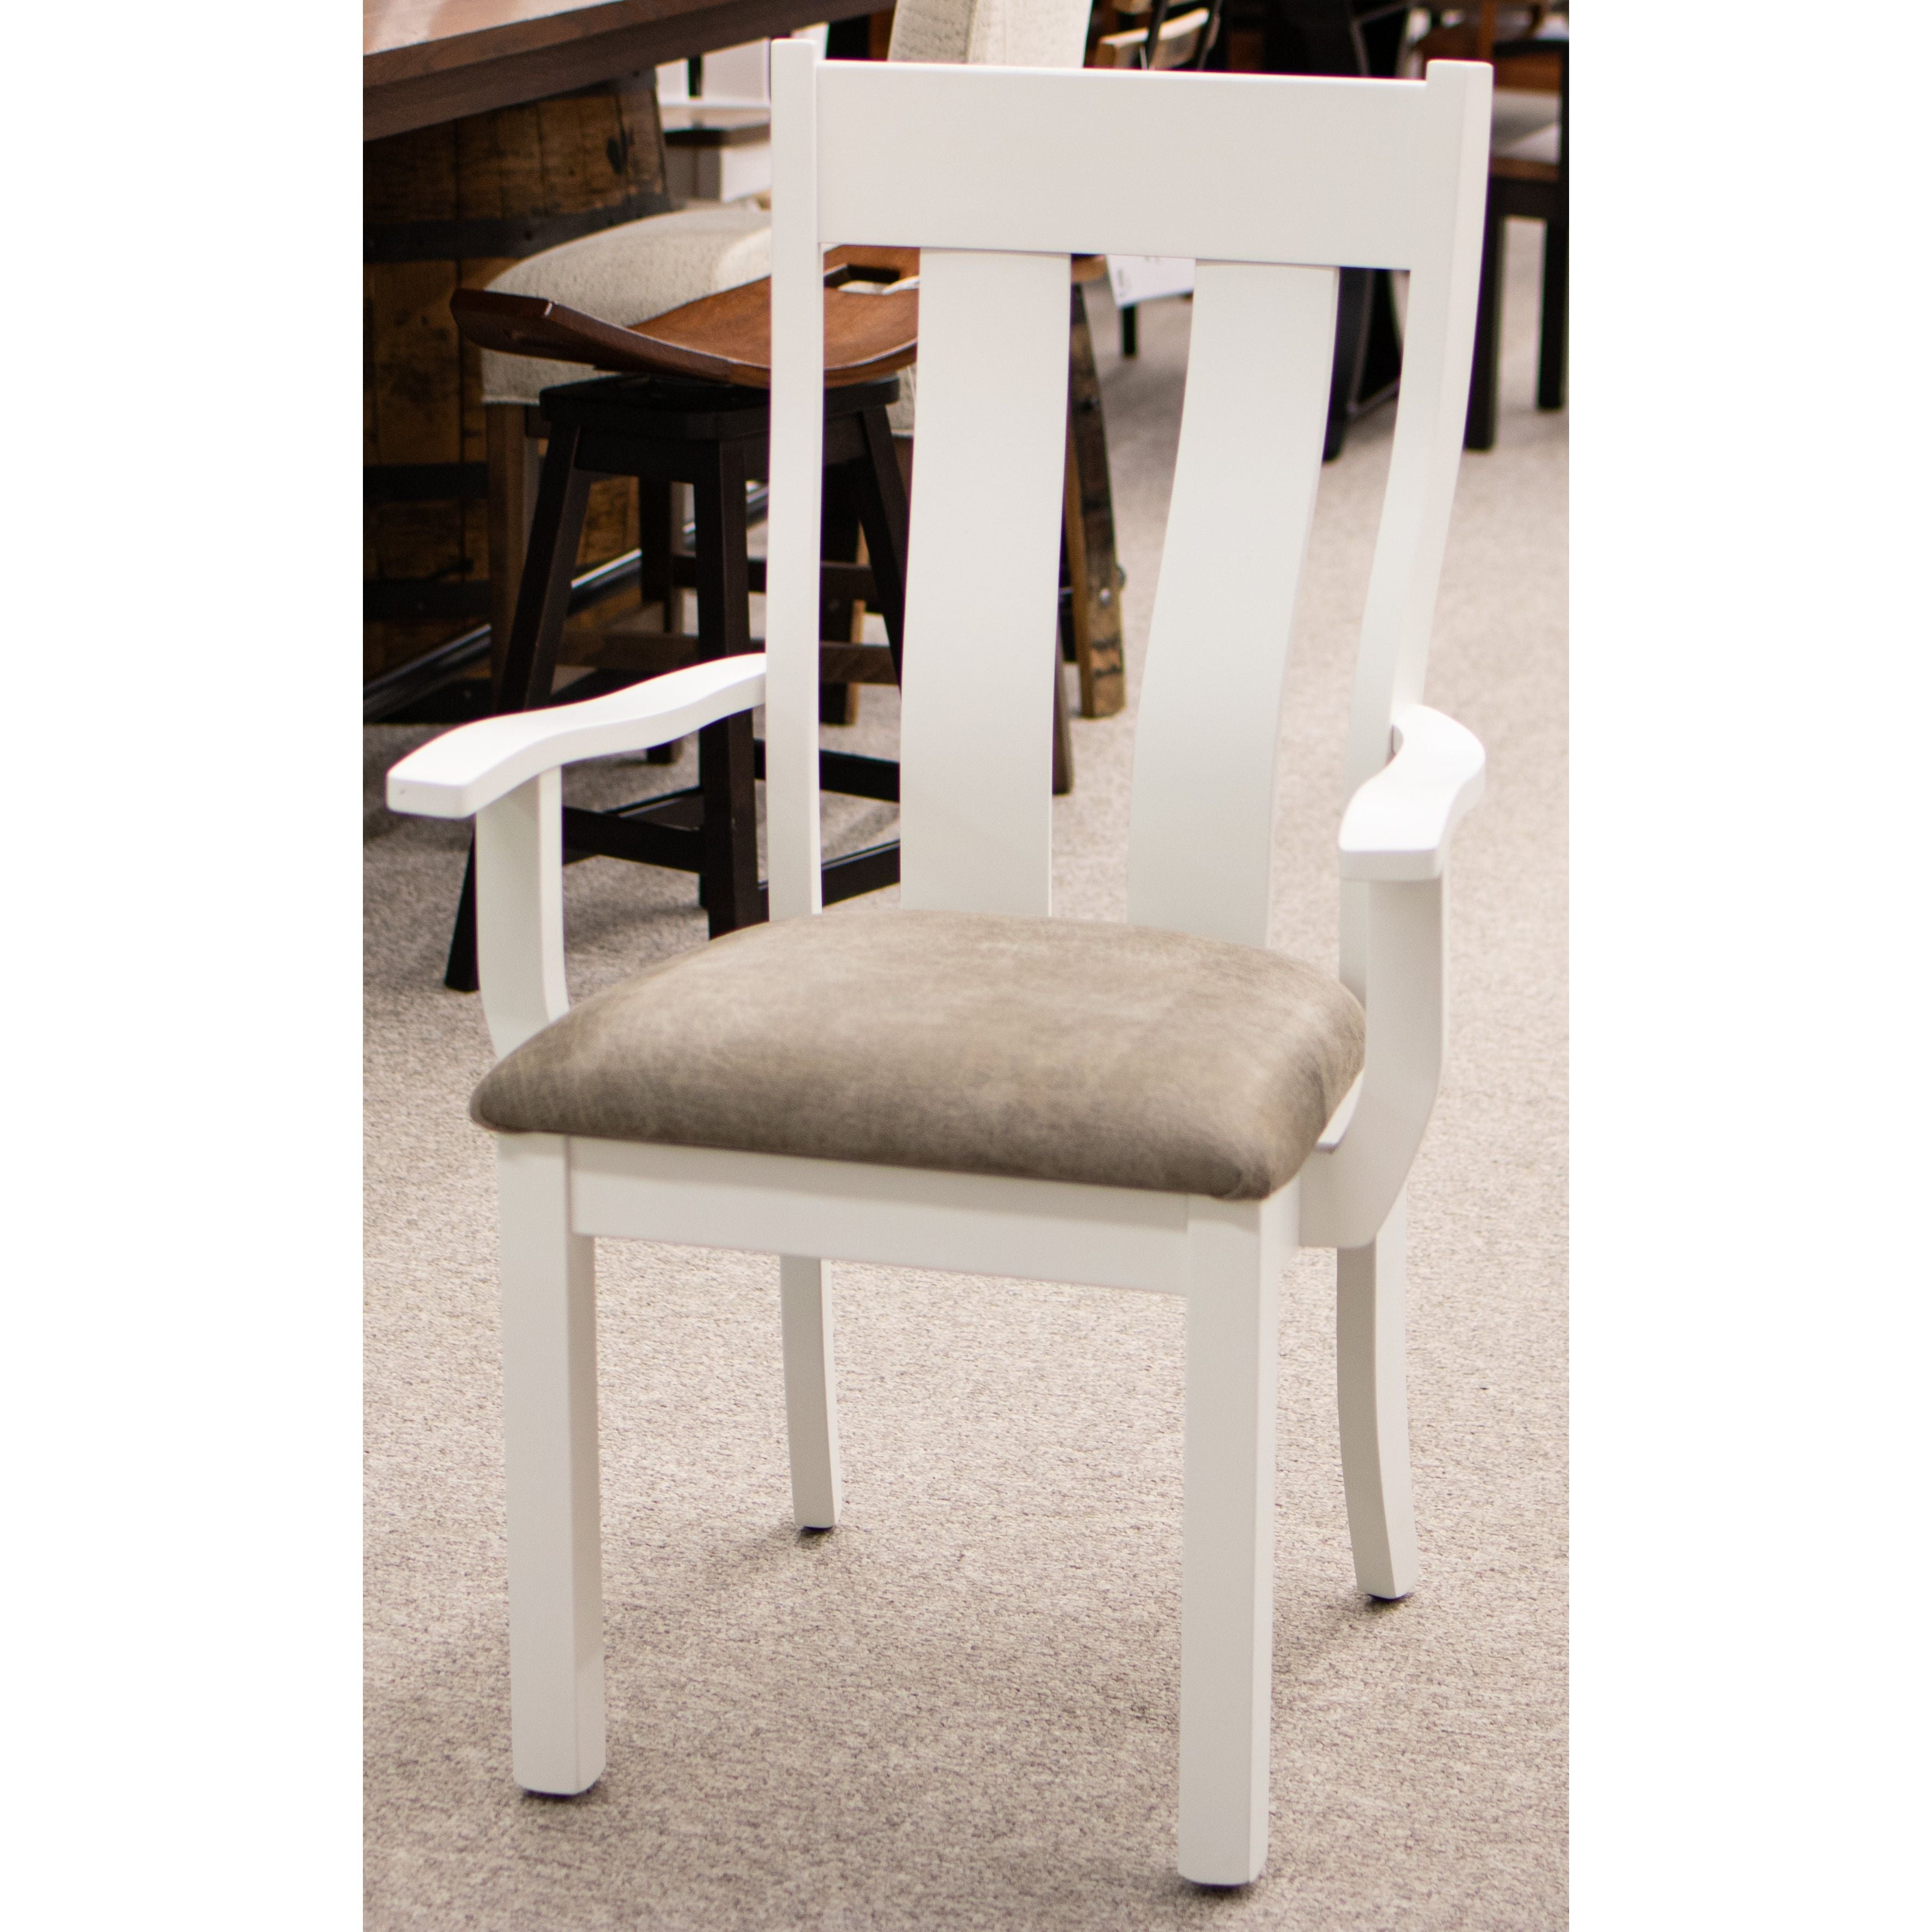 Urbana Arm Dining Chair with Upholstered Seat